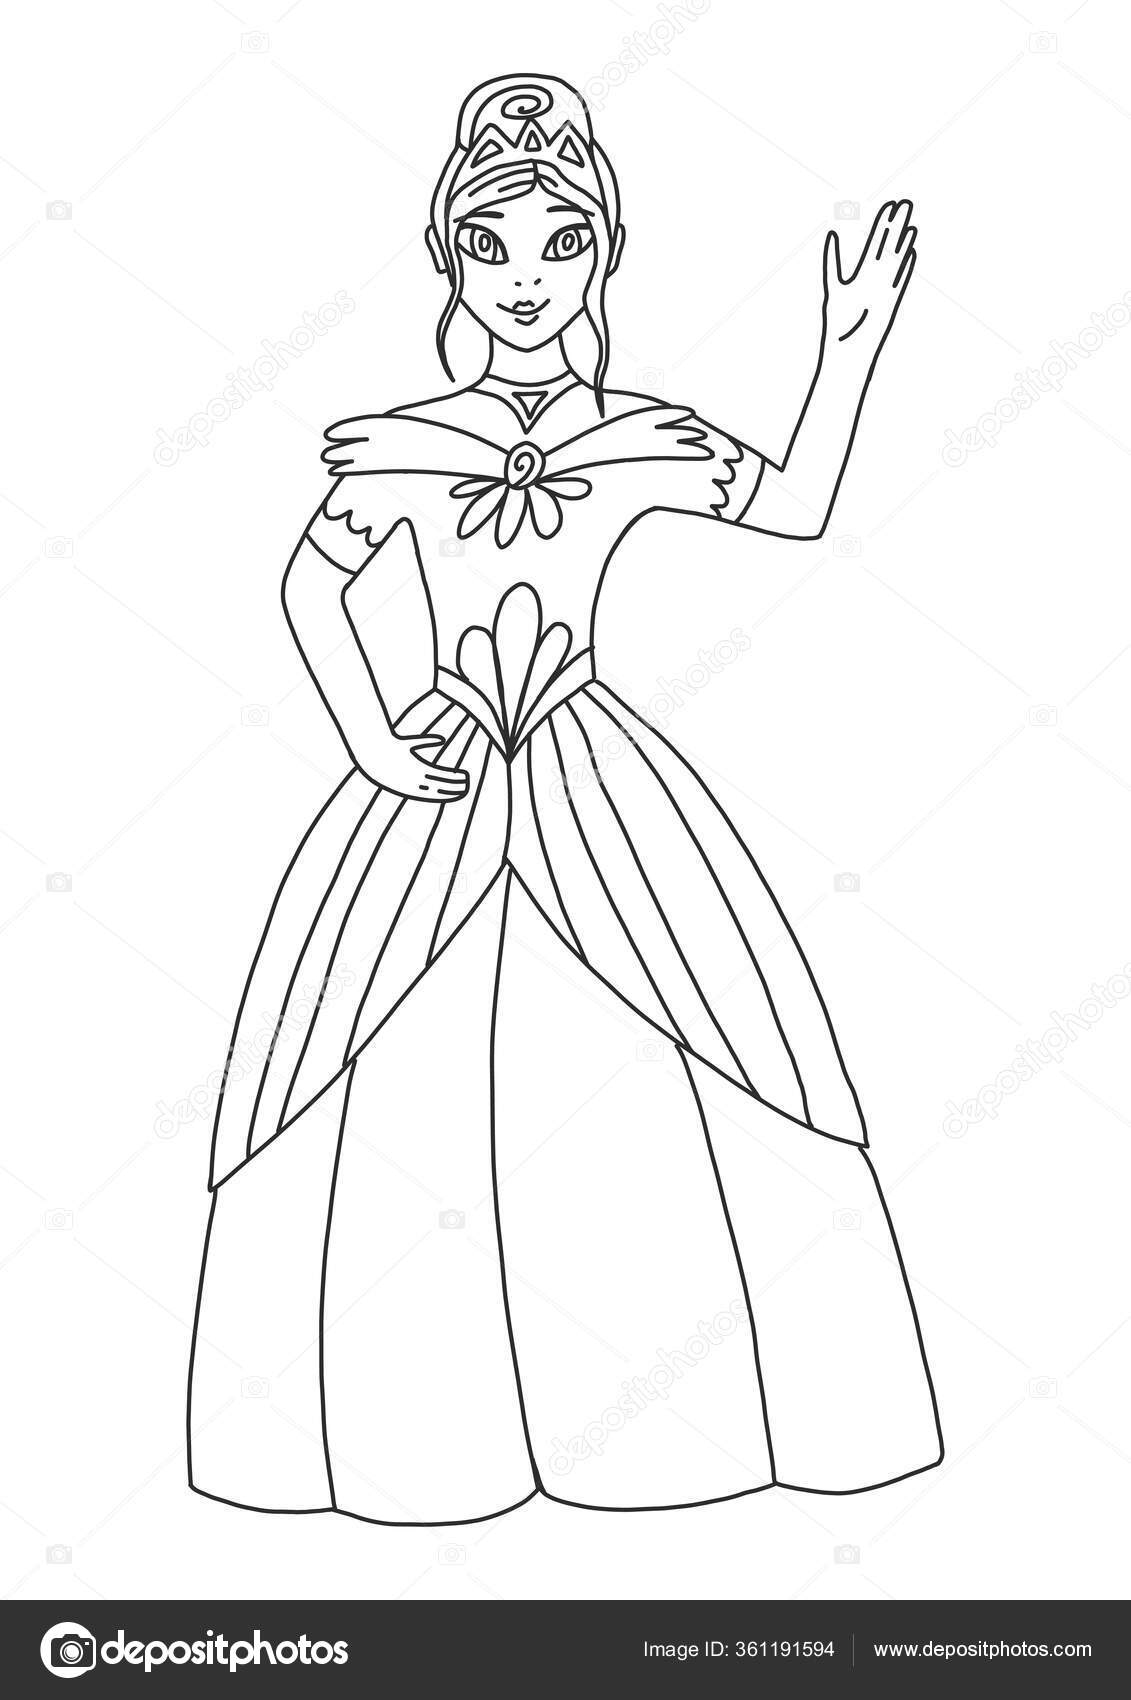 Coloring Book Adults Children Beautiful Princess Queen Waves Her ...